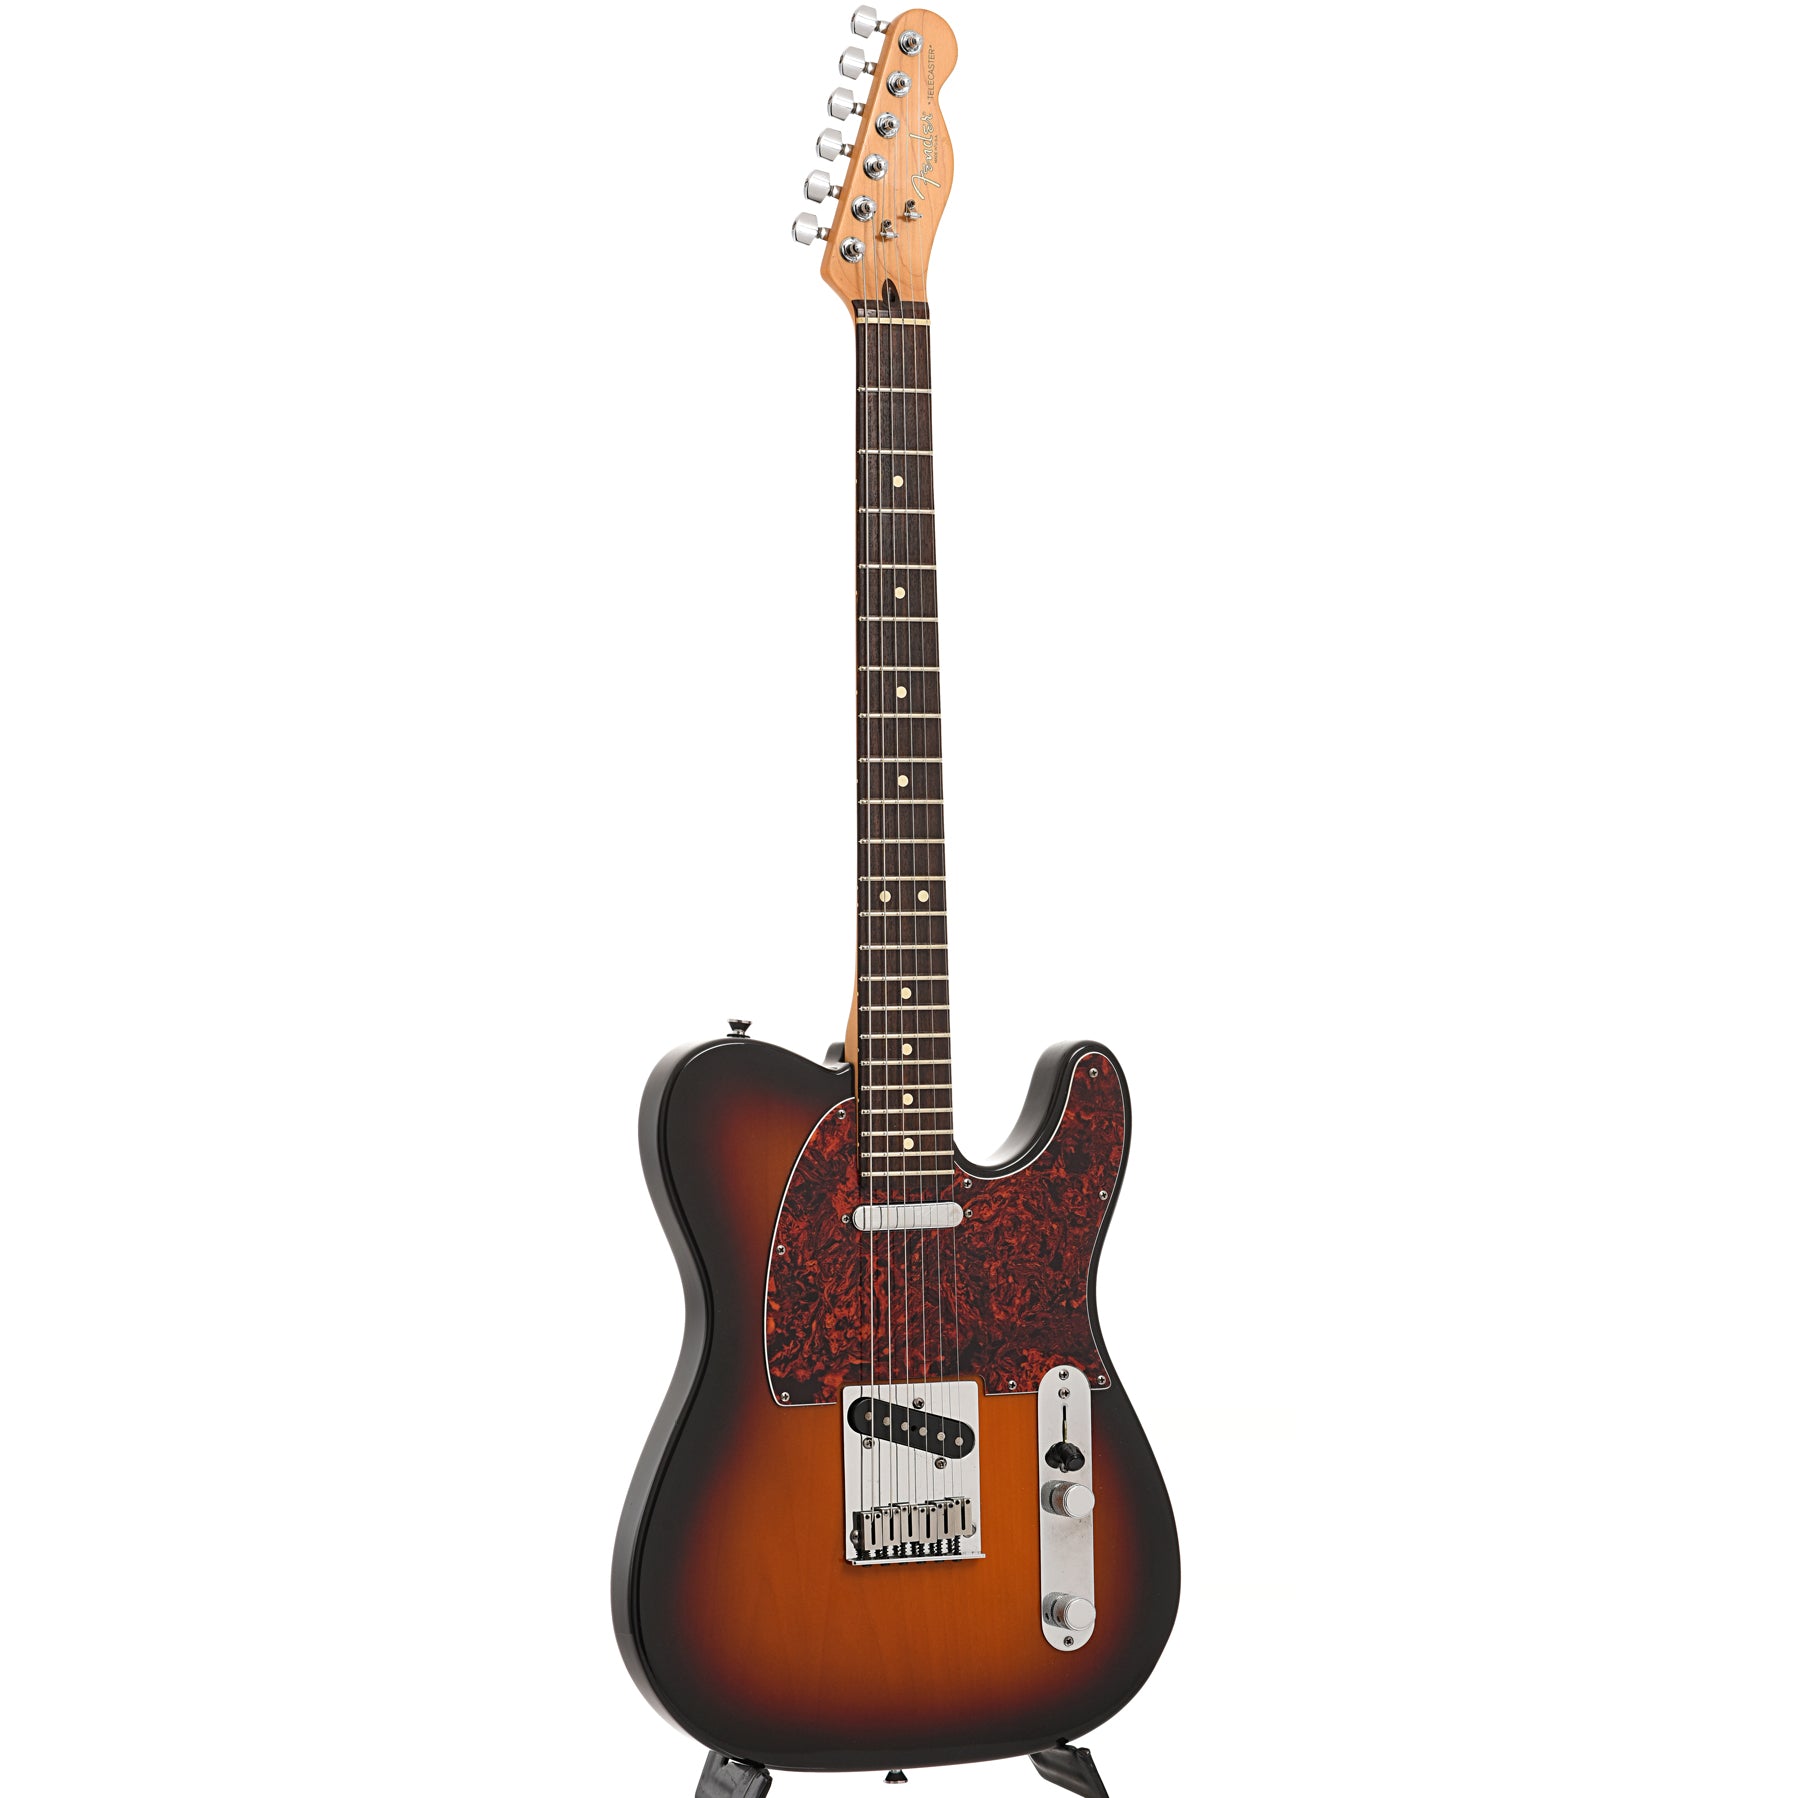 Full Front and side of Fender American Standard 50th Anniversary Telecaster